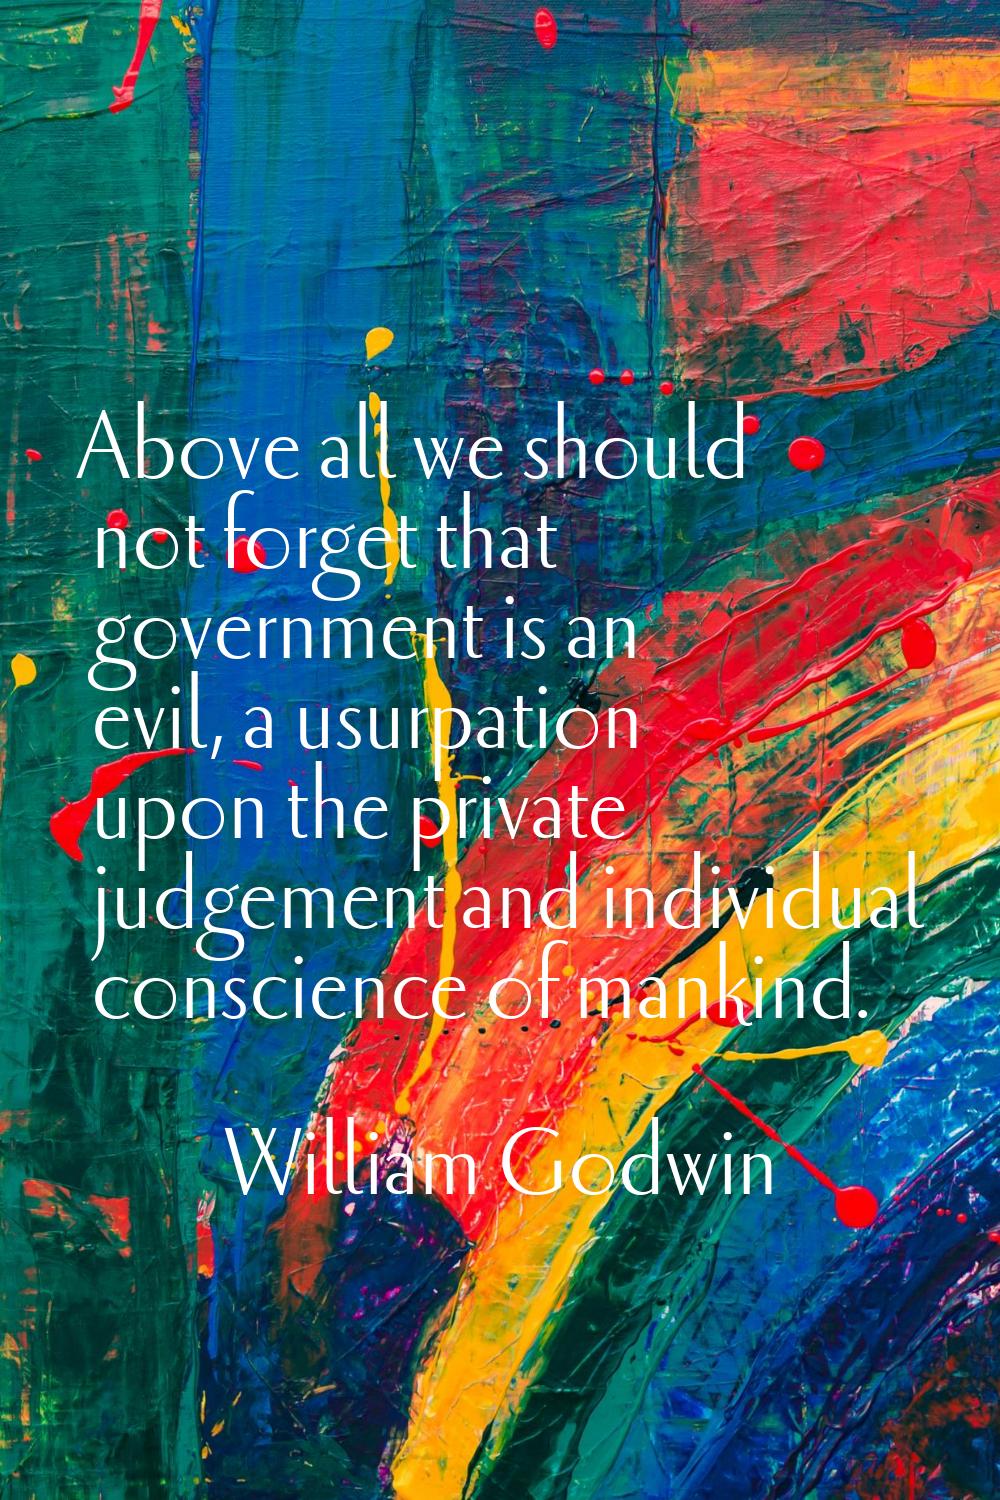 Above all we should not forget that government is an evil, a usurpation upon the private judgement 